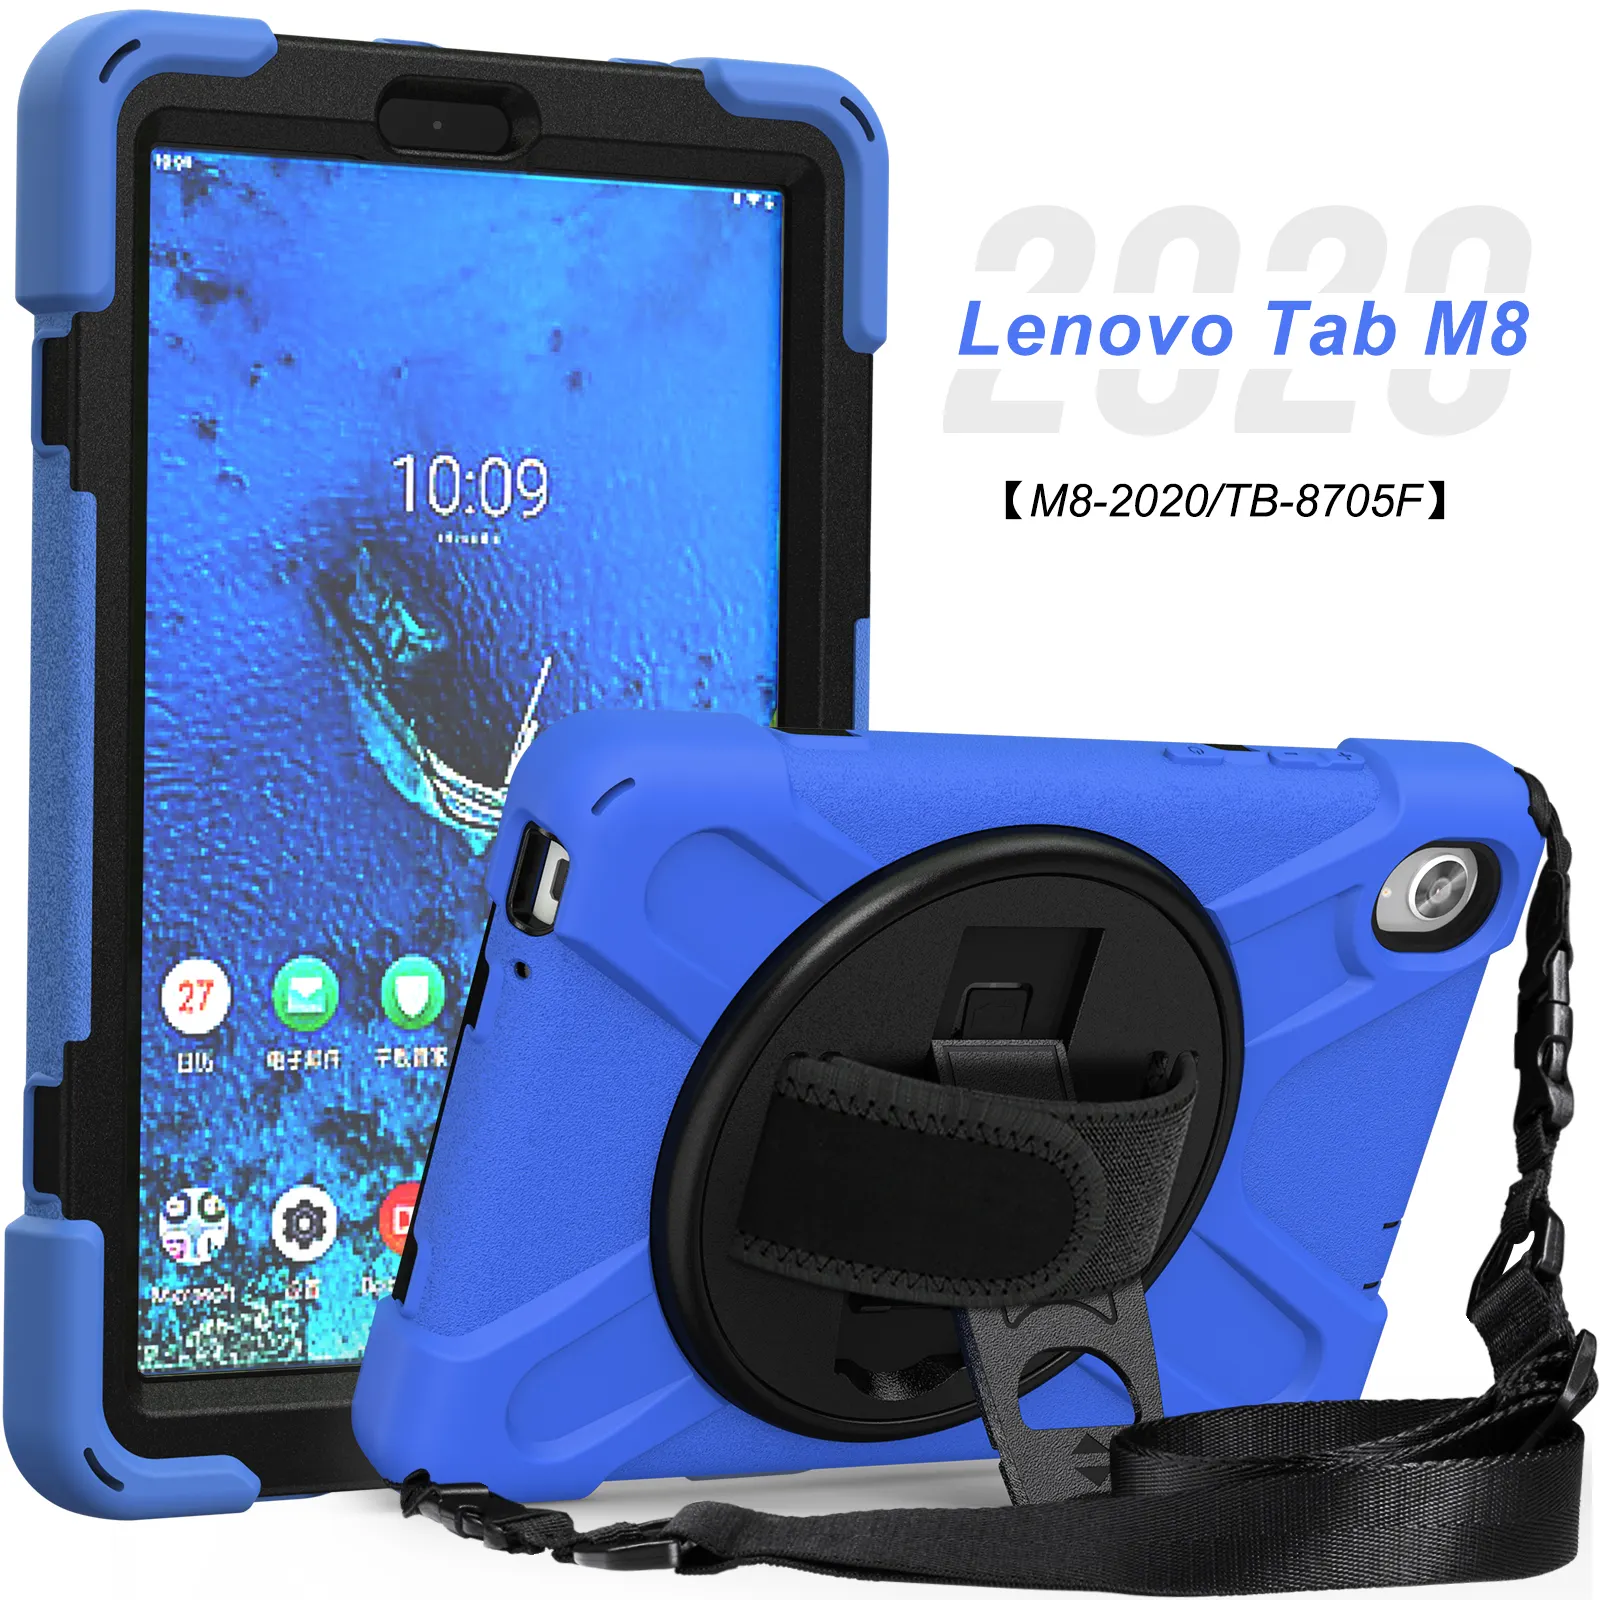 Factory Price Tablet Case For Lenovo Tab M8 8inch 2020 TB-8705F 8705N With 360 Rotating Kickstand and Hand Strap Shoulder Strap